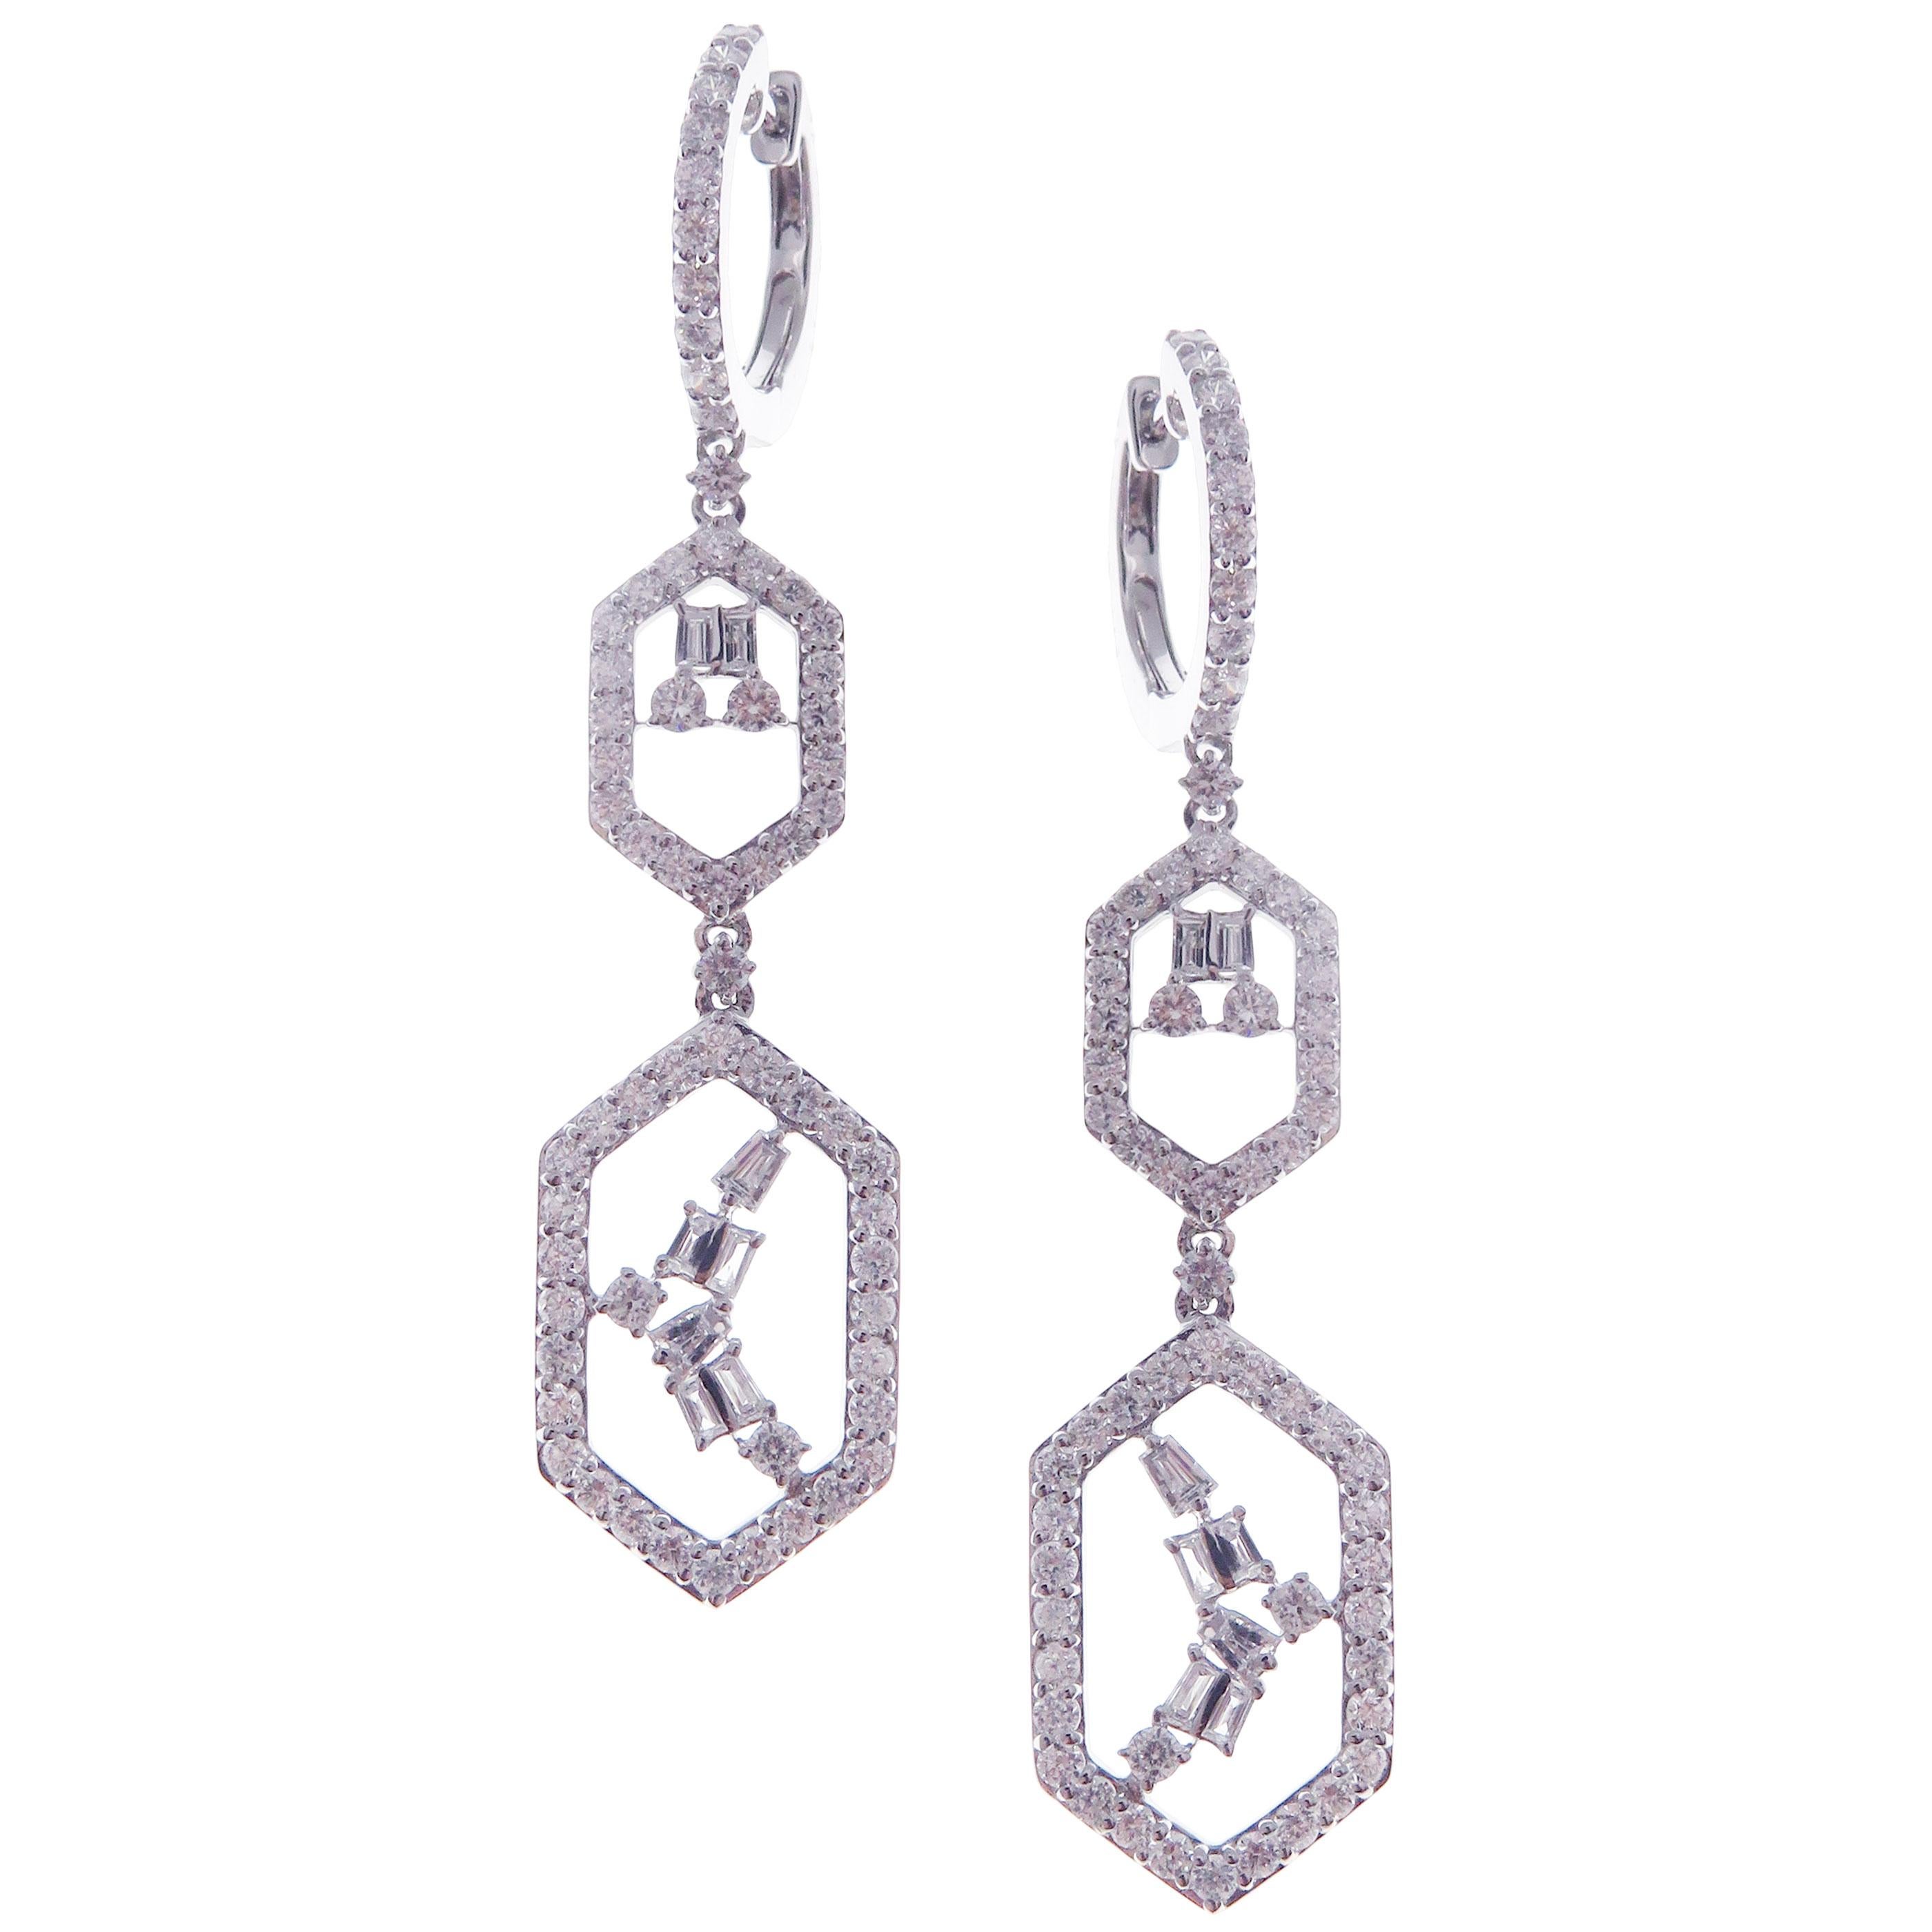 These symmetrical dangling diamond earrings are crafted in 18-karat white gold, featuring 139 round white diamonds totaling of 2.36 carats and 16 baguette white diamonds totaling of 0.42 carats.
Approximate total weight 7.10 grams.
These earrings